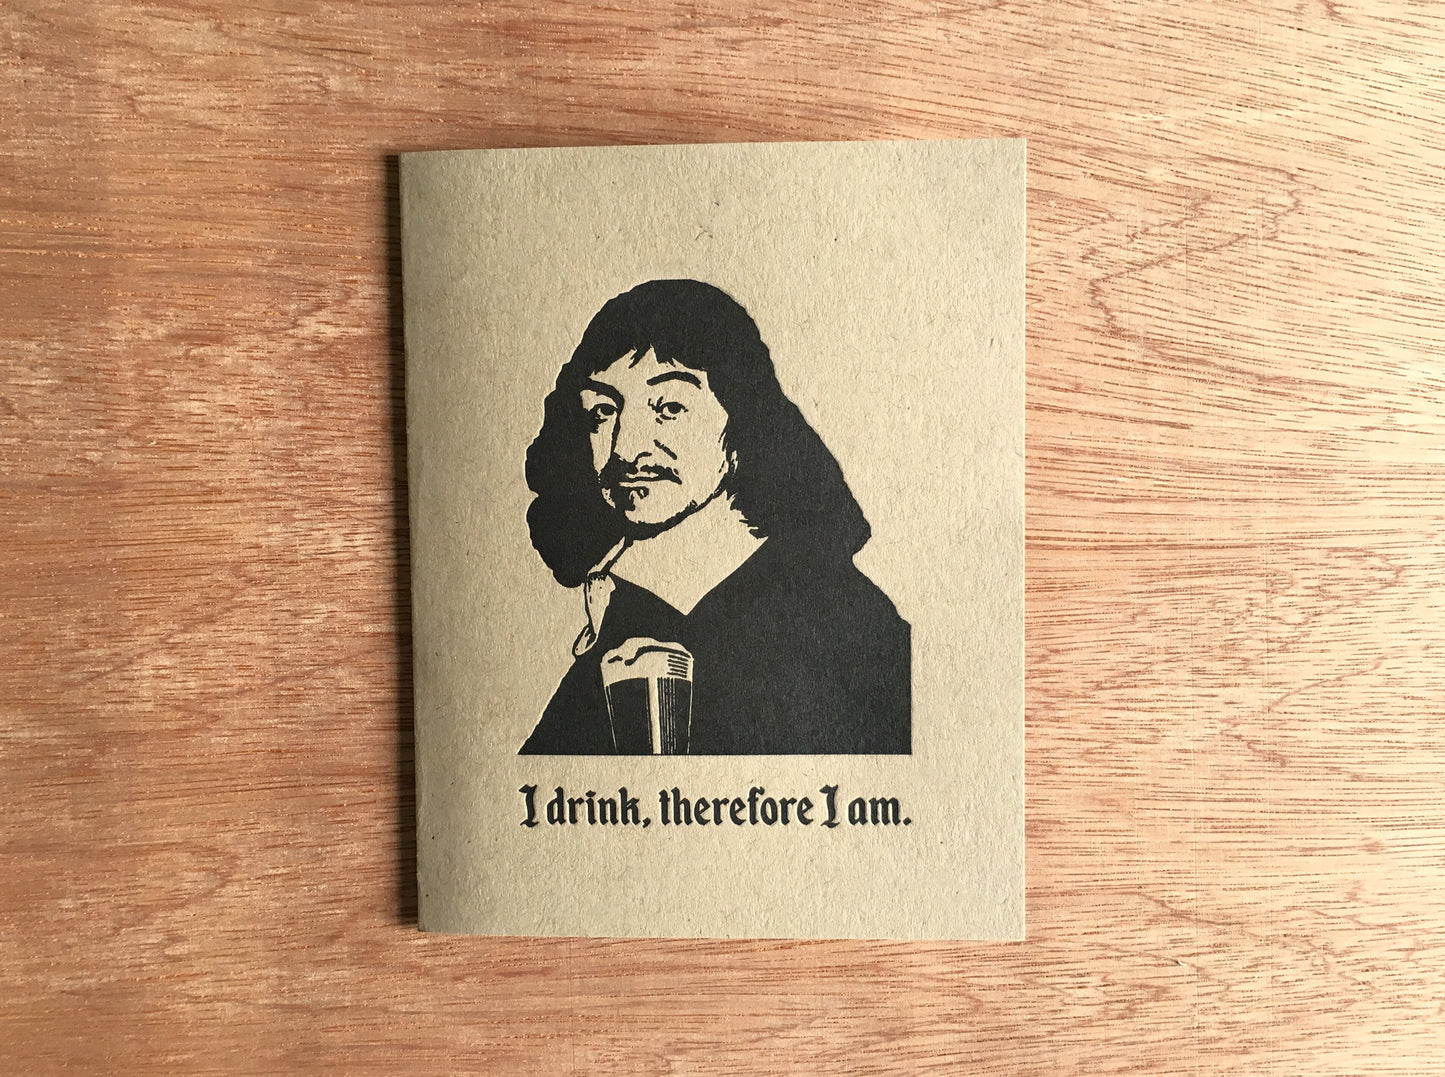 I Think, therefore I drink. Letterpress Philosophy Greeting Card.